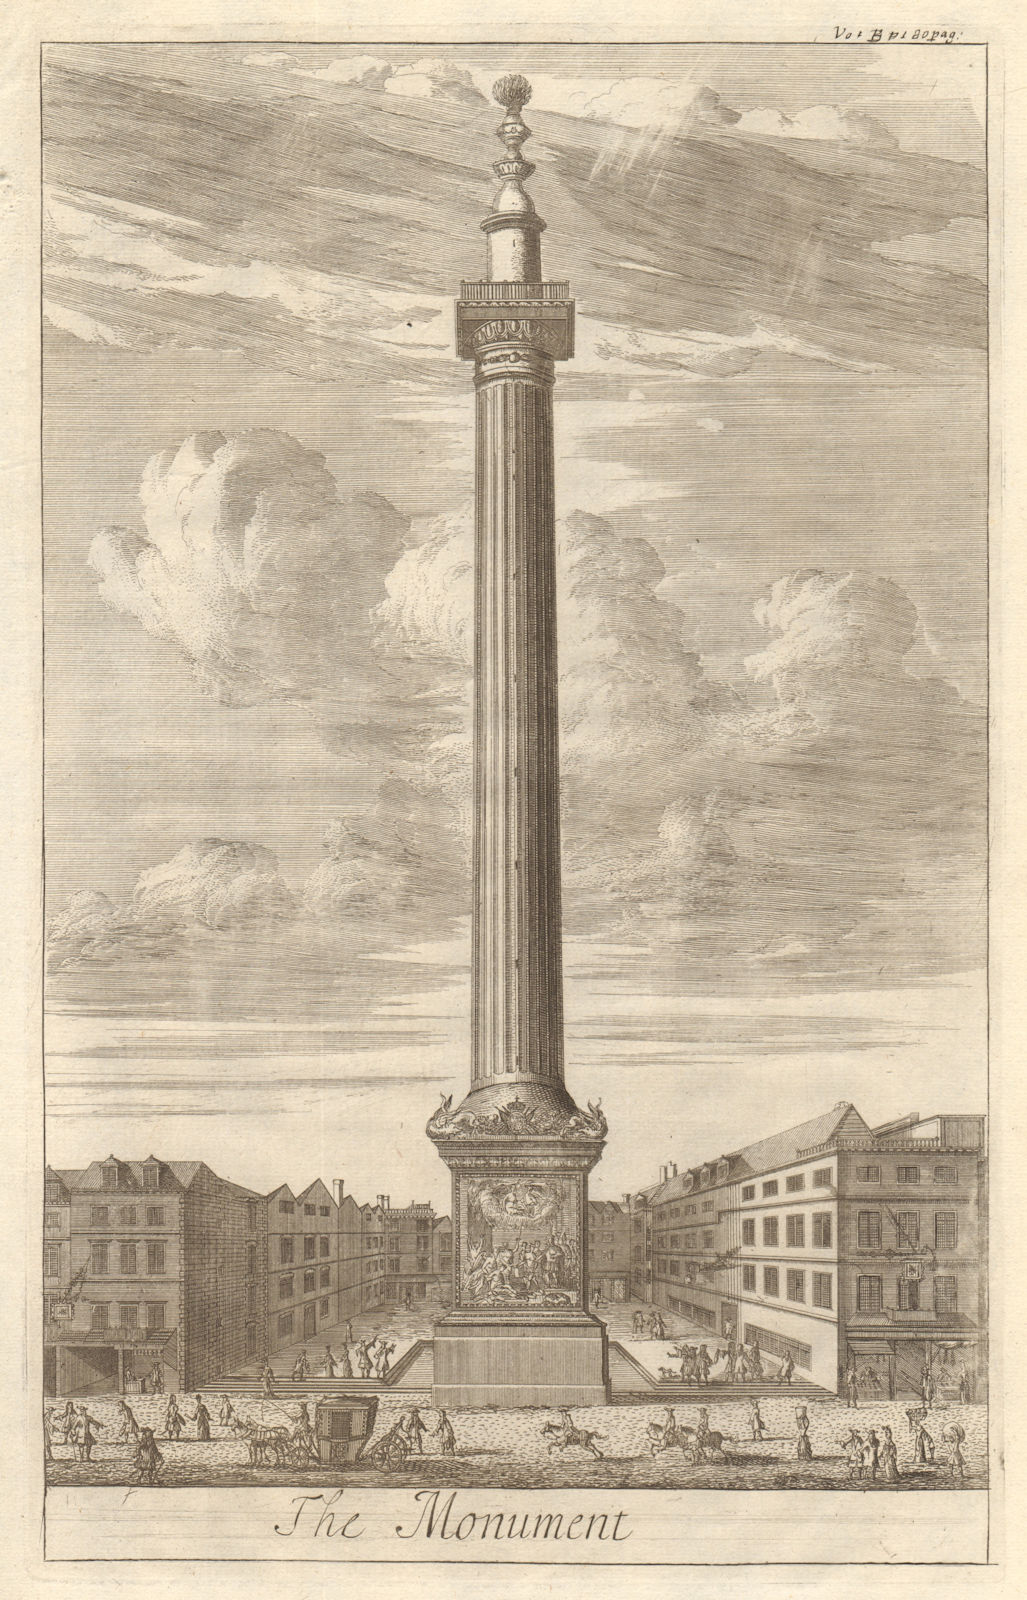 Associate Product 'The Monument', City of London. STOW/STRYPE 1720 old antique print picture